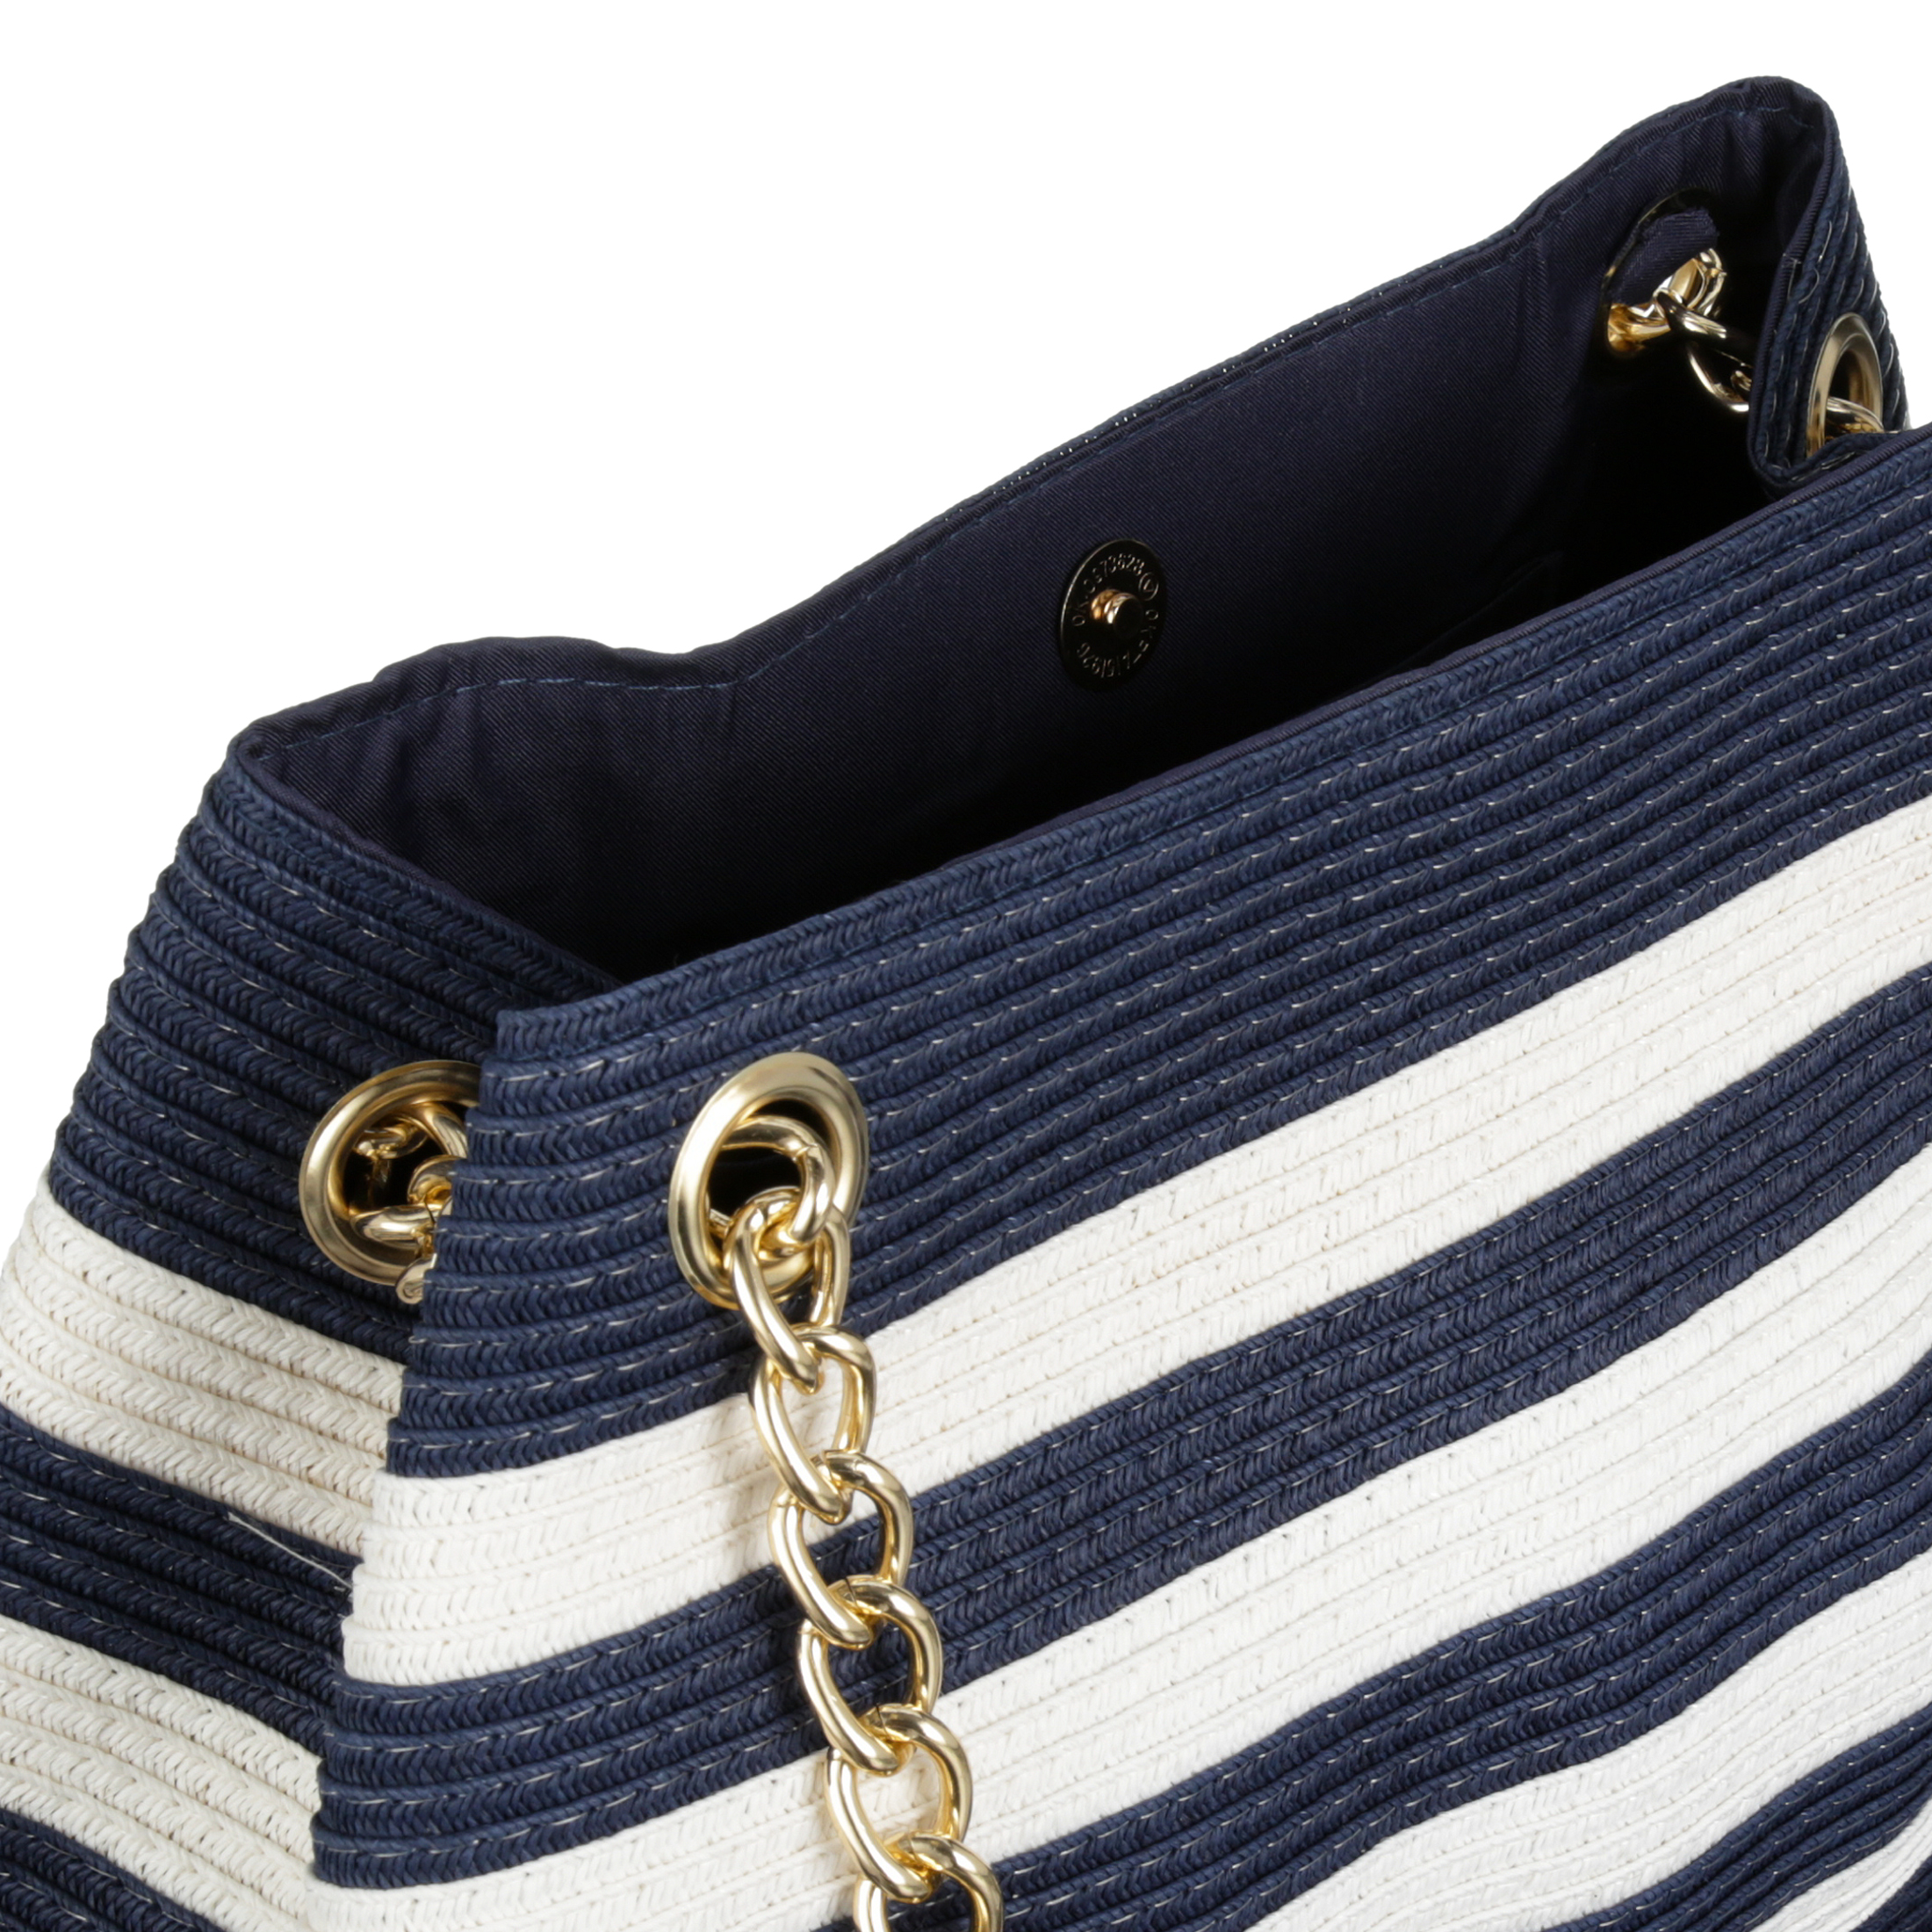 Magid Women's Adult Paper Straw Beach Handbag with Gold Chain Navy White - image 2 of 4